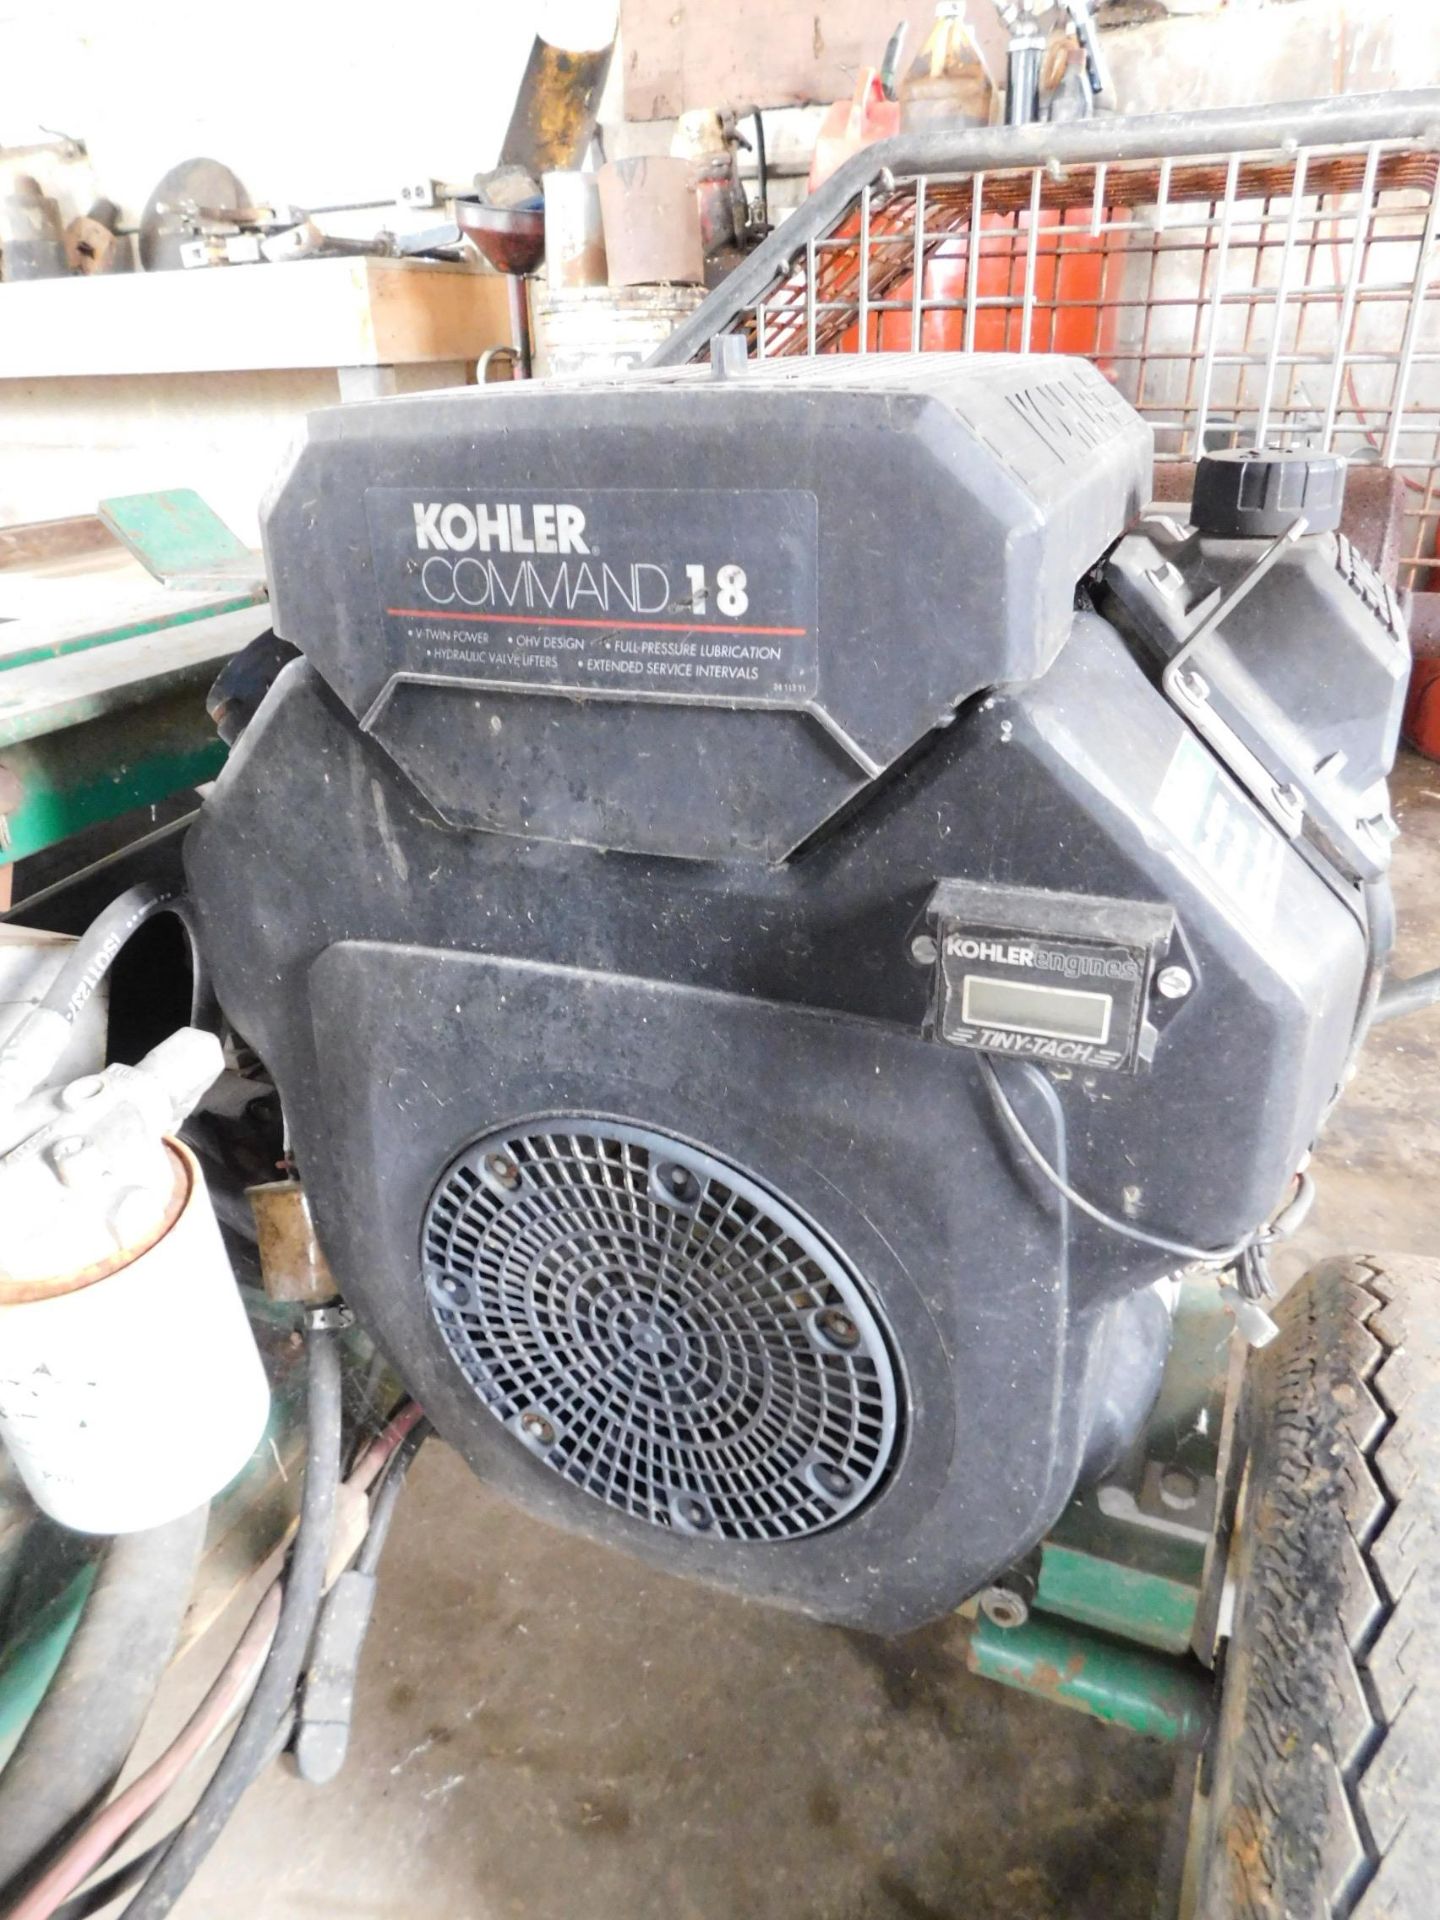 McElroy 618 Gas Powered Rolling Fusion Machine, 6"-18" Capacity, Kohler Command 18 Gas Engine - Image 6 of 11